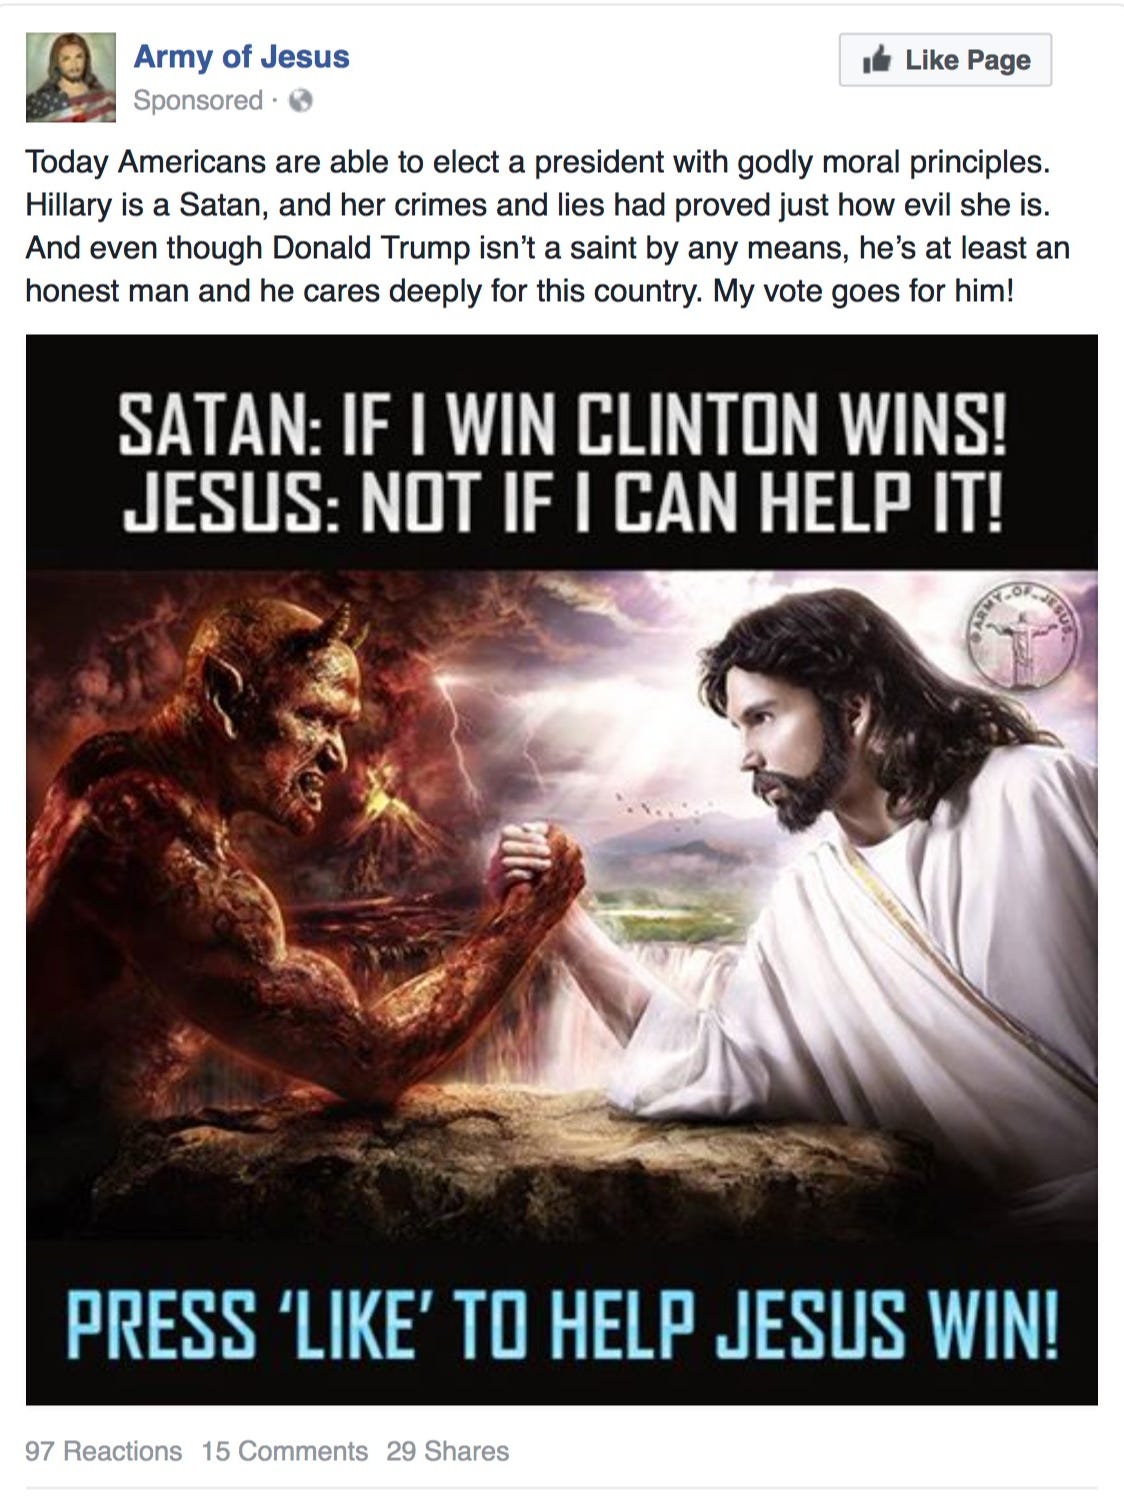 An ad placed on Facebook on Oct. 19, 2016 by Russian-linked groups, believed to be part of an attempt to sway the U.S. electorate in the 2016 presidential race.